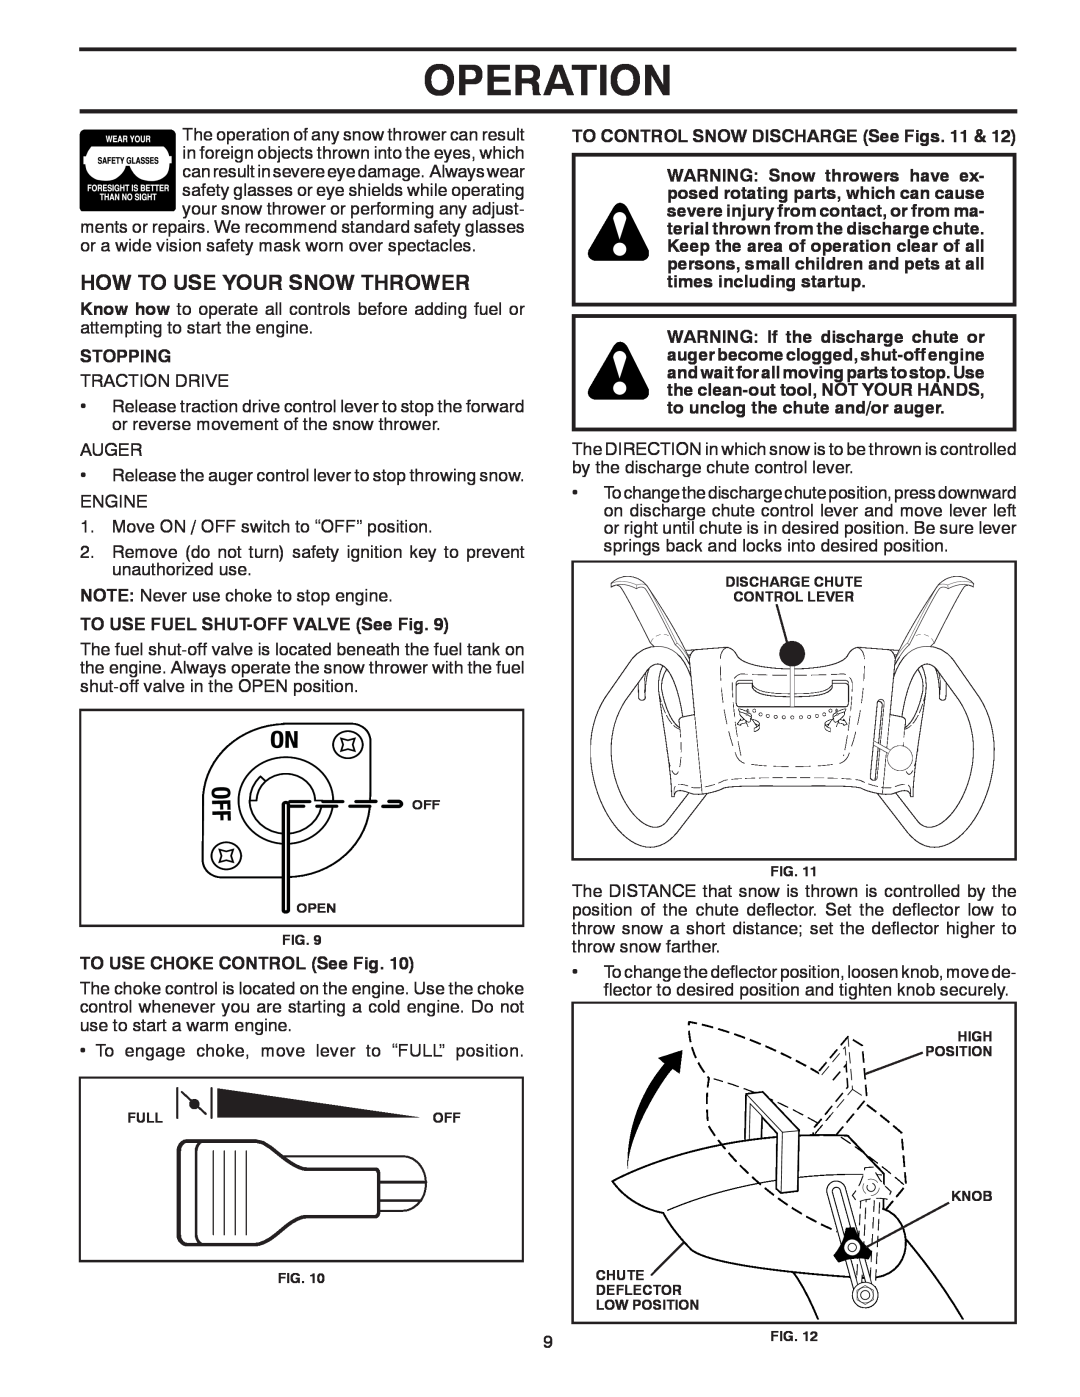 Poulan 96192002802, 430442 owner manual How To Use Your Snow Thrower, Operation, Stopping, TO USE FUEL SHUT-OFFVALVE See Fig 